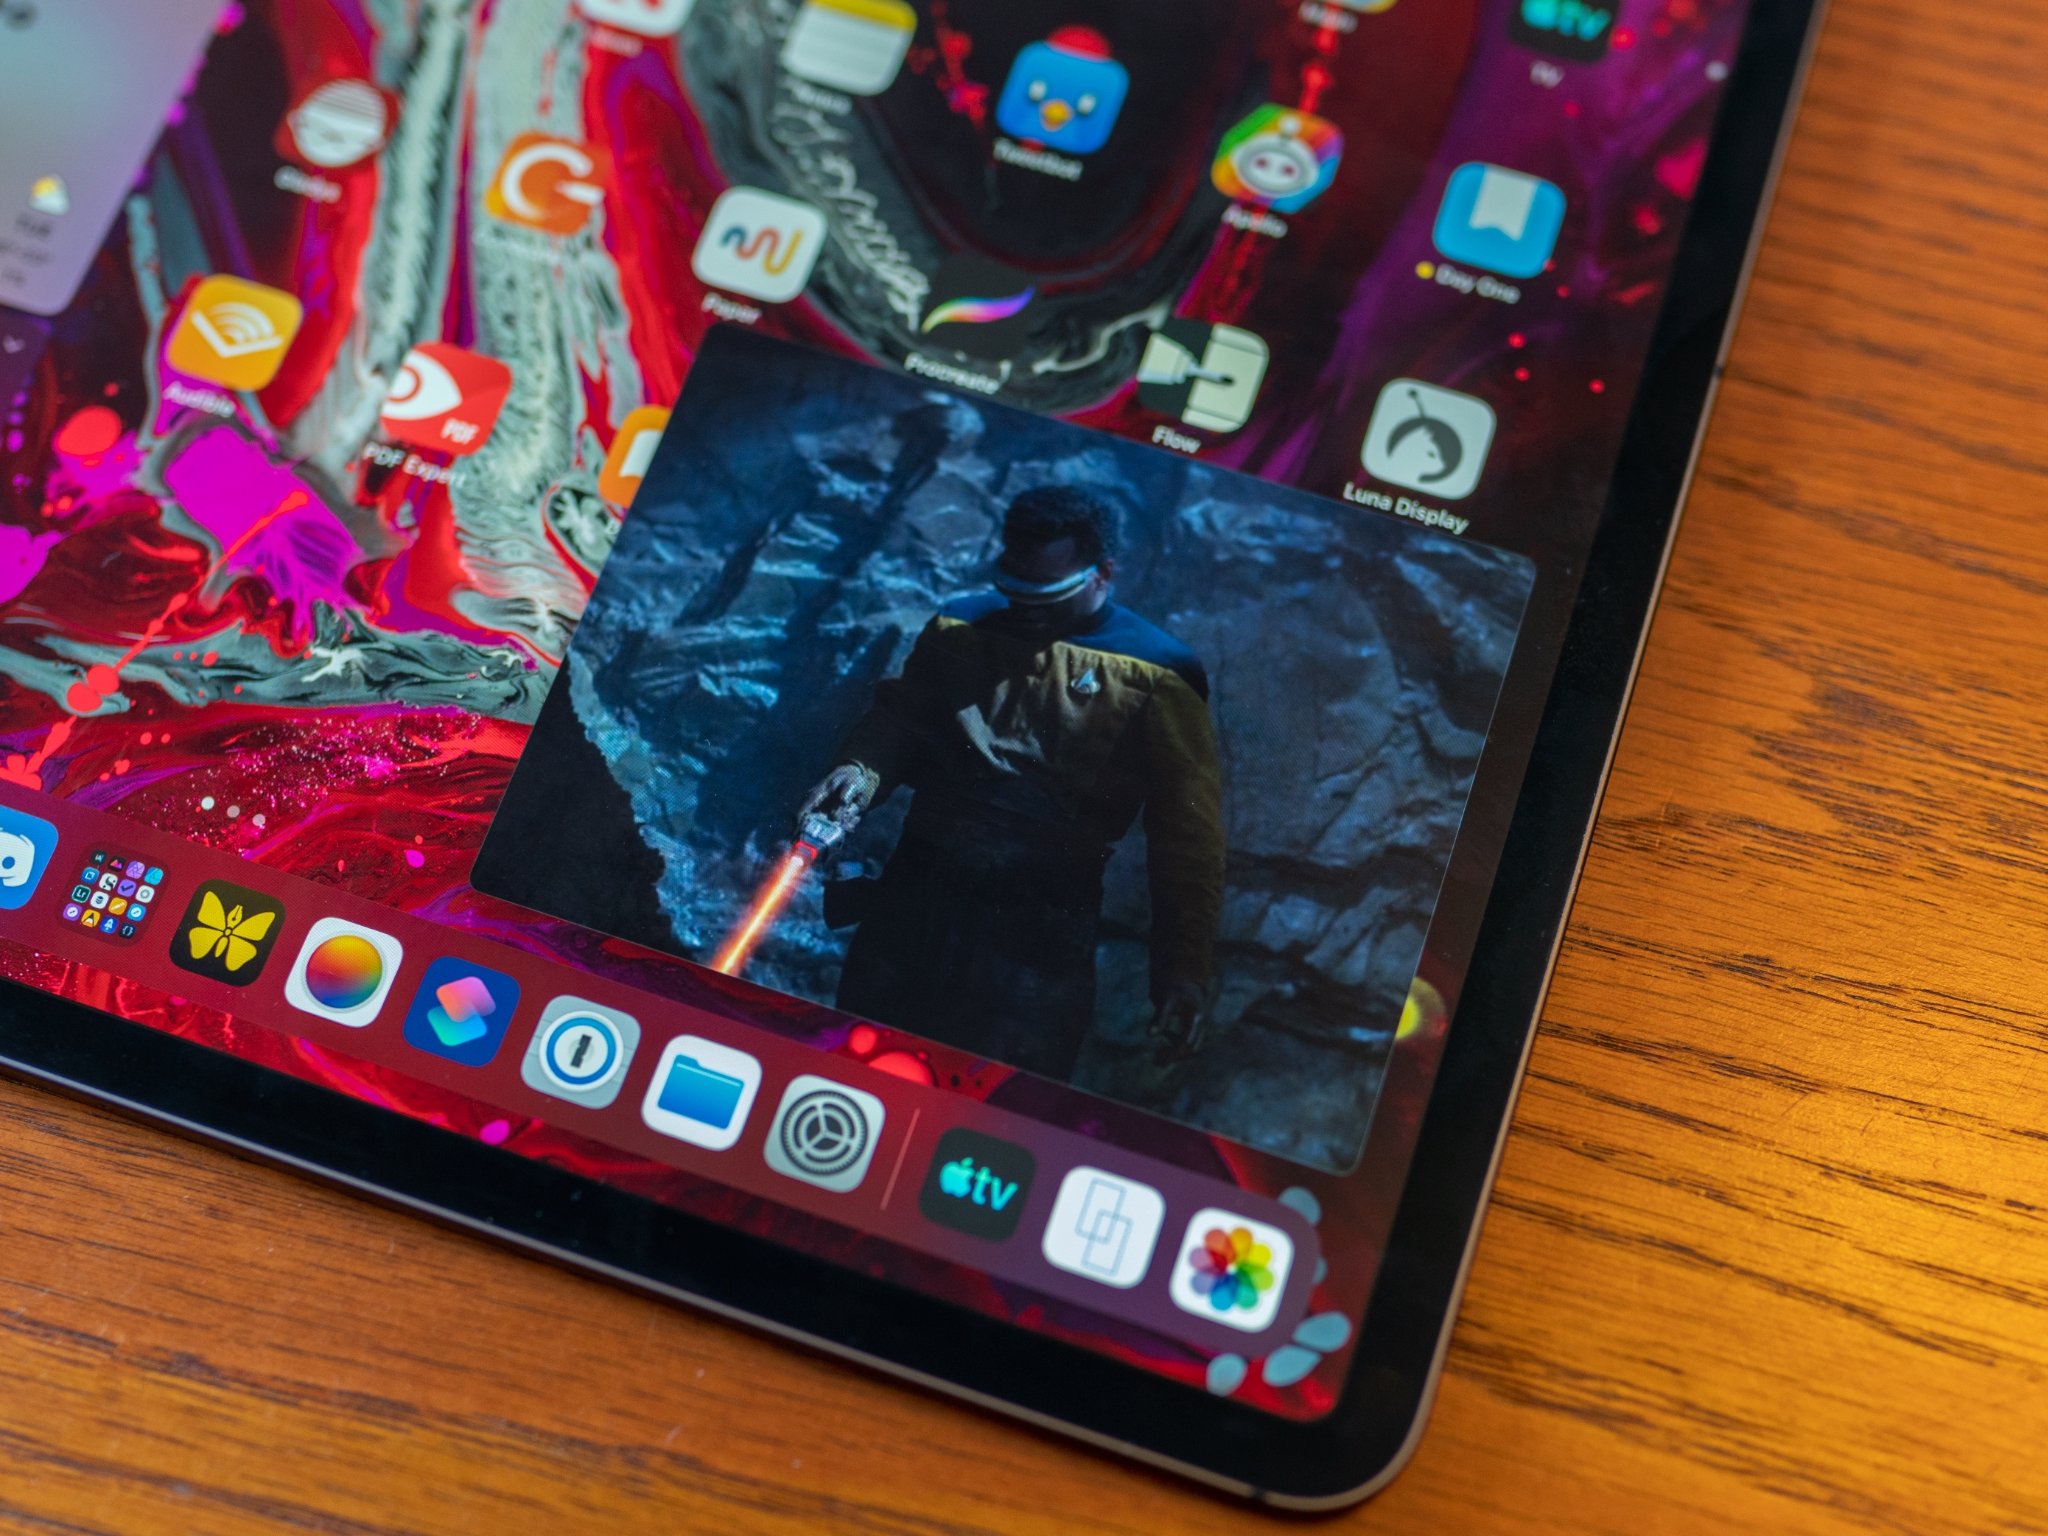 How to enable Picture-in-Picture mode on your iPad